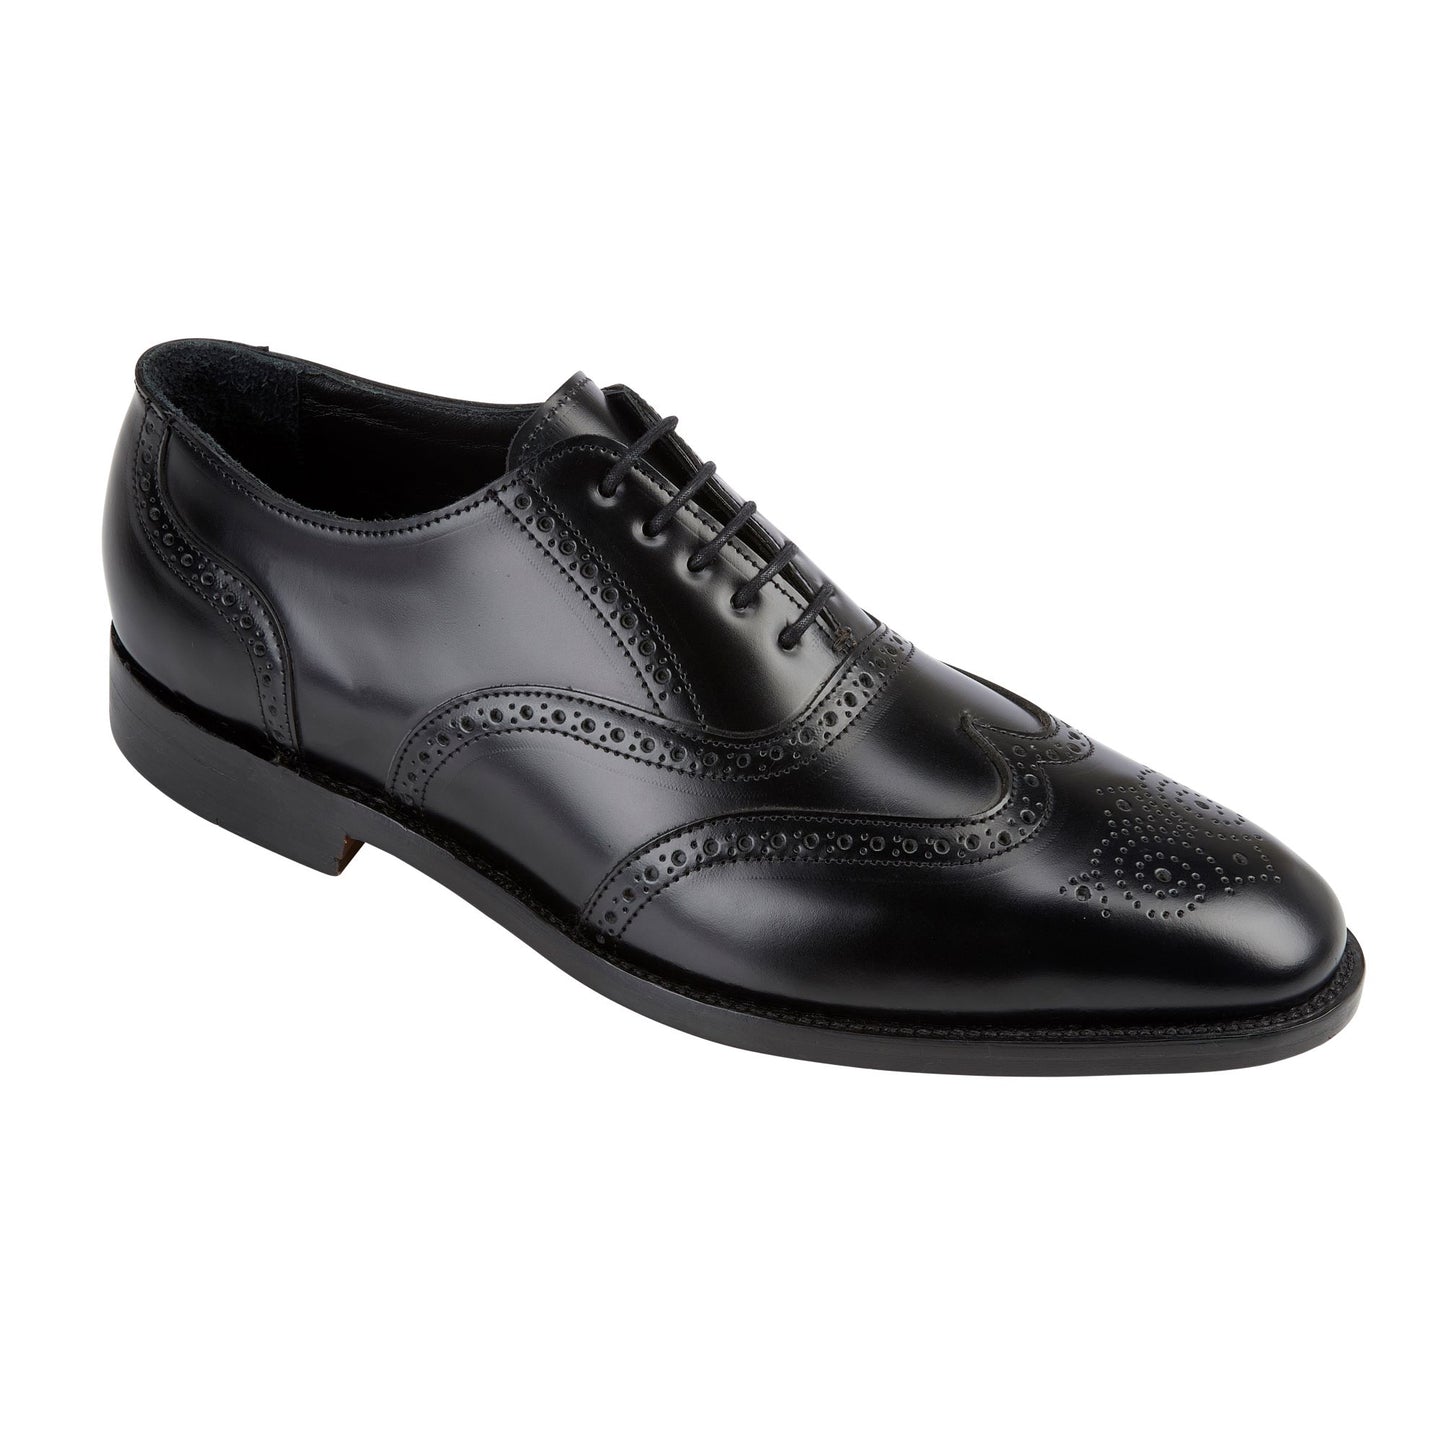 Henry | Oxford Wing Tip Brogue